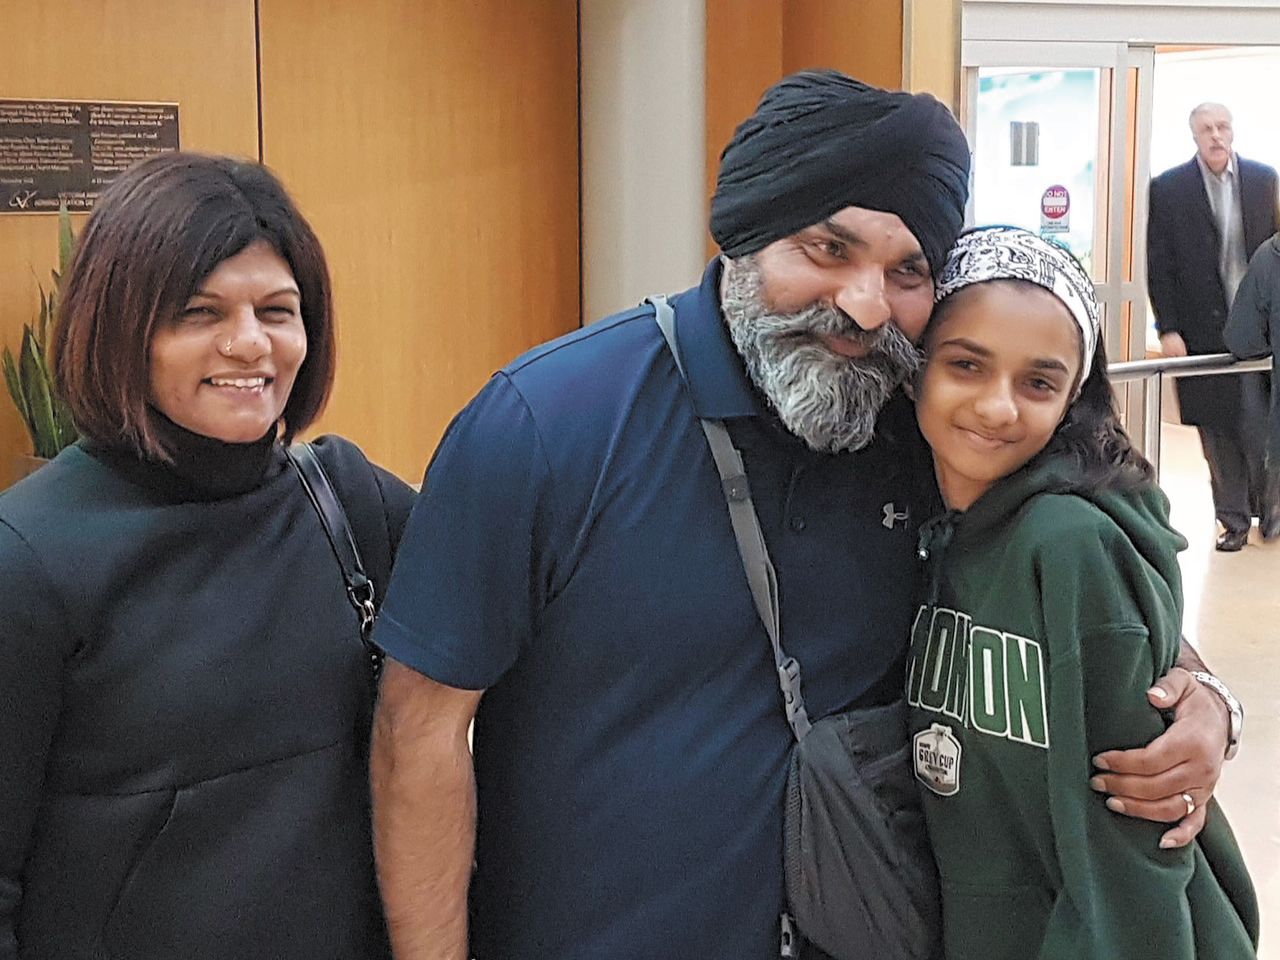 PO2 Kanwar Nijjer is greeted by his wife Gurdeep Nijjer and his daughter Sadbd Nijjer after returning from Operation Impact in Baghdad.Photo courtesy PO2 Kanwar Nijjer